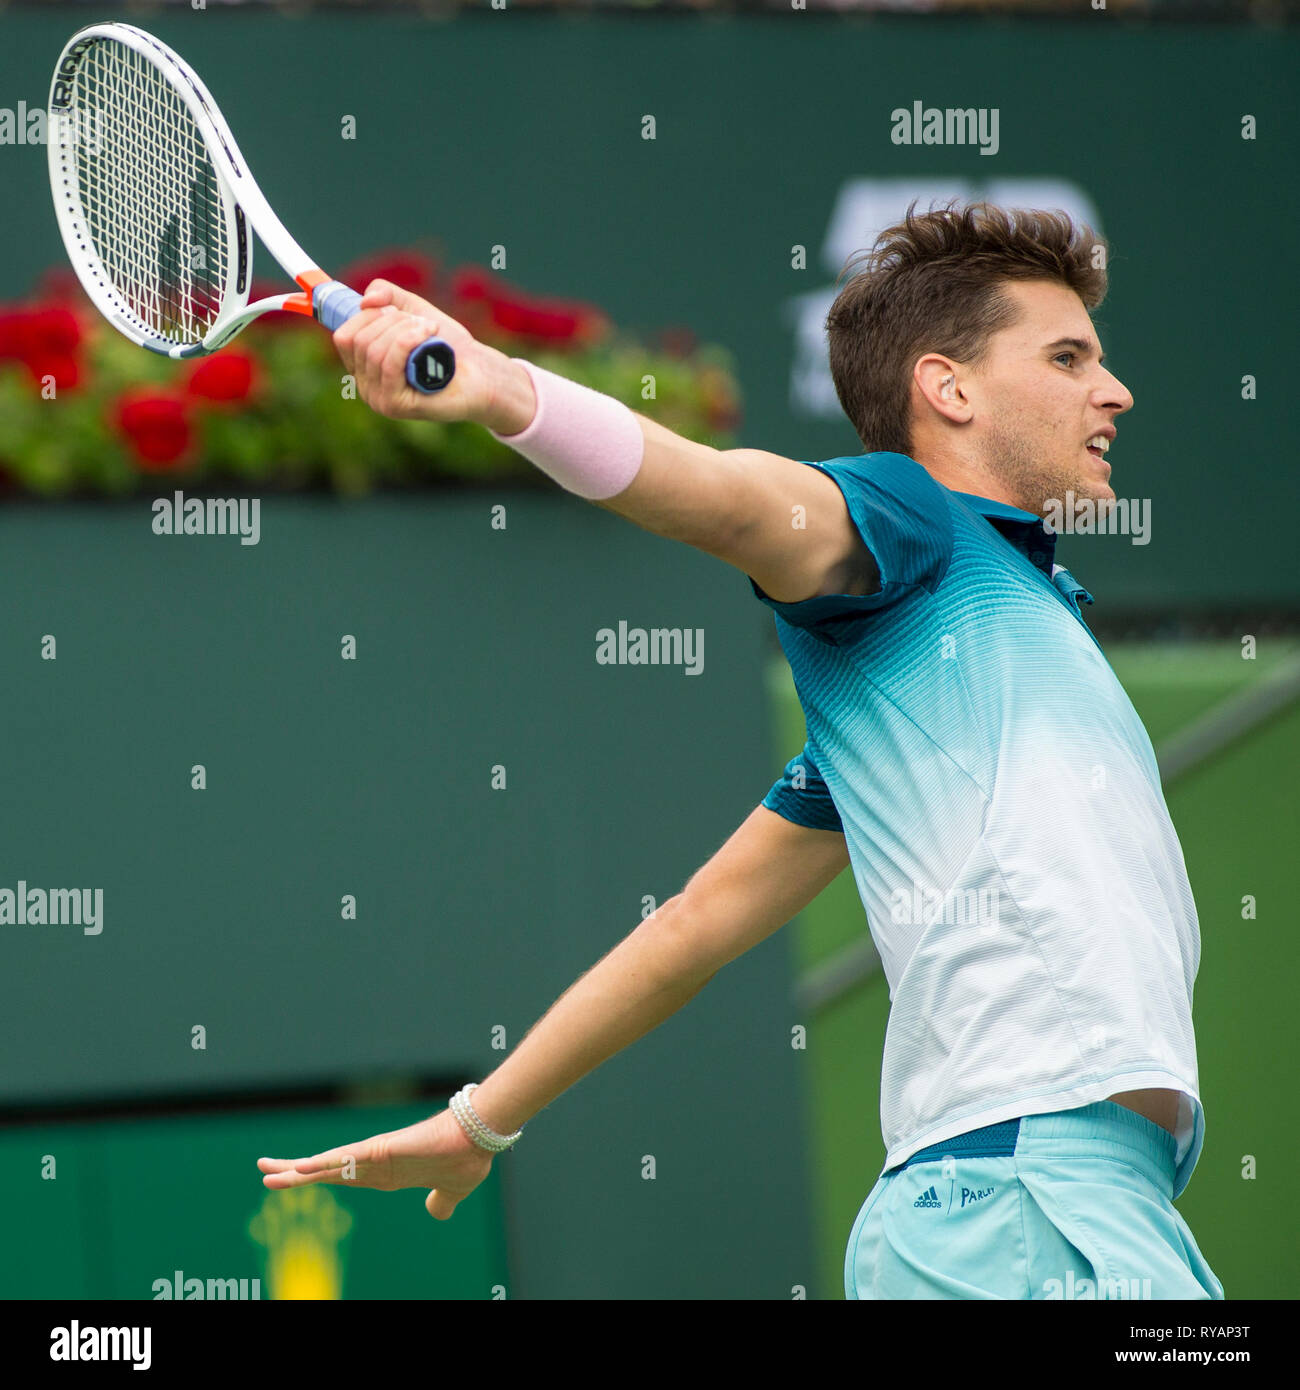 Indian Wells, California, USA. 11th Mar, 2019. Dominic Thiem (AUT) in  action where he defeated Gilles Simon (FRA) 6-3, 6-1 at the BNP Paribas  Open at the Indian Wells Tennis Garden in